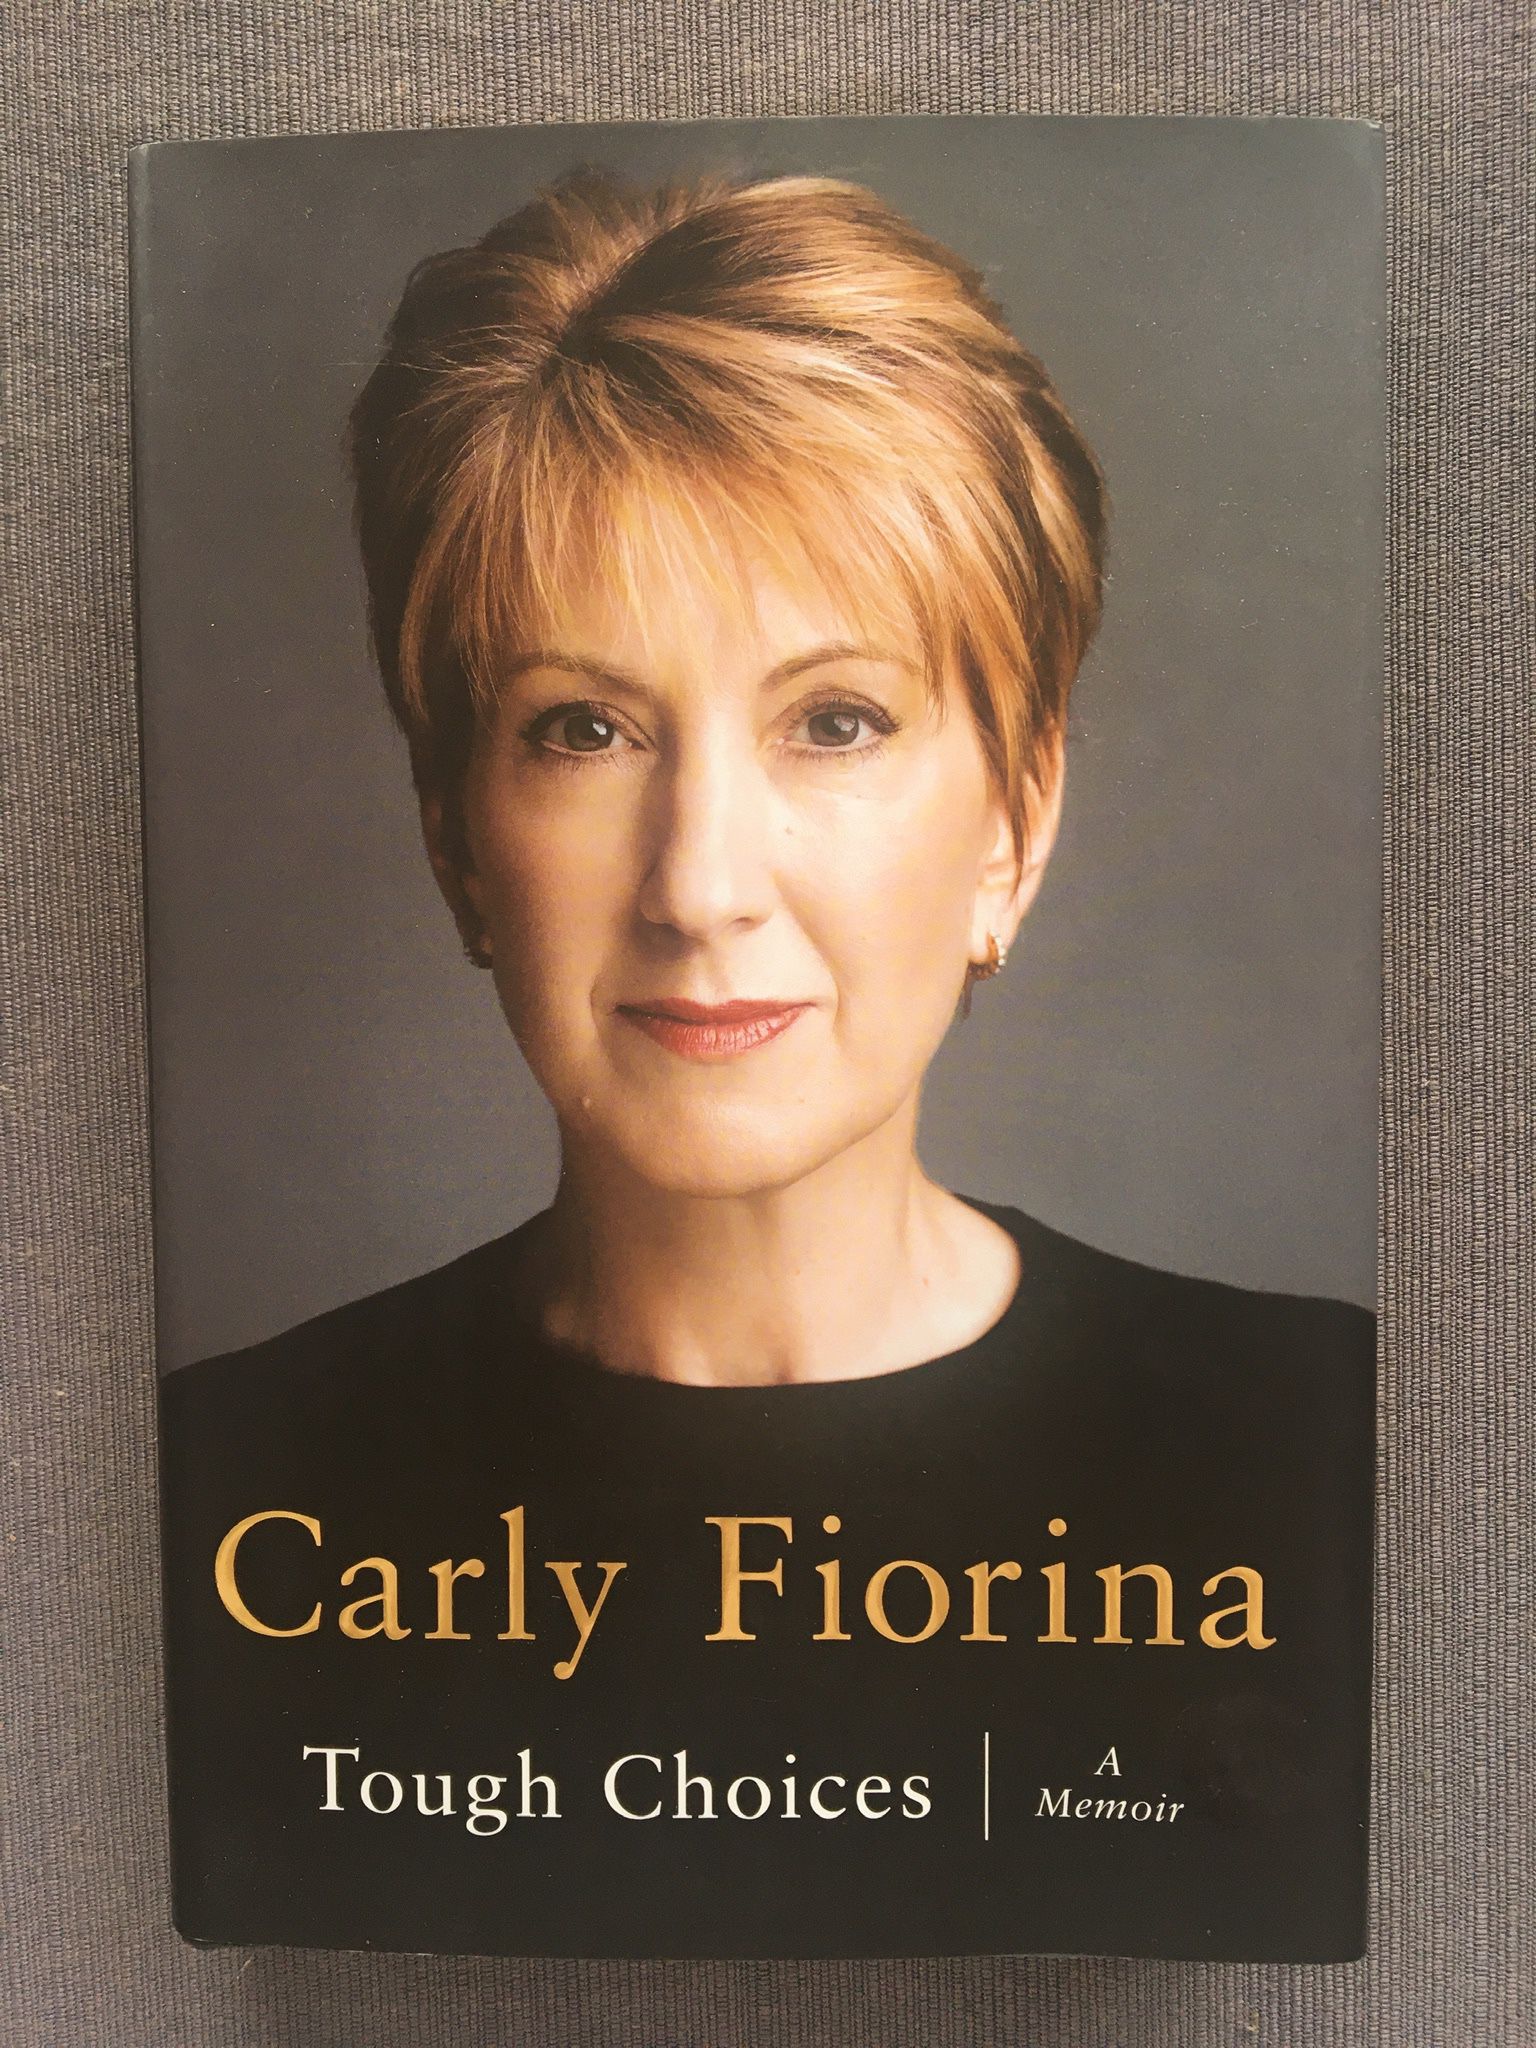 Tough Choices A Memoir by Carly Fiorina hardcover new condition by the former CEO of Hewlett-Packard, first female CEO of a Fortune 20 company, and Fo